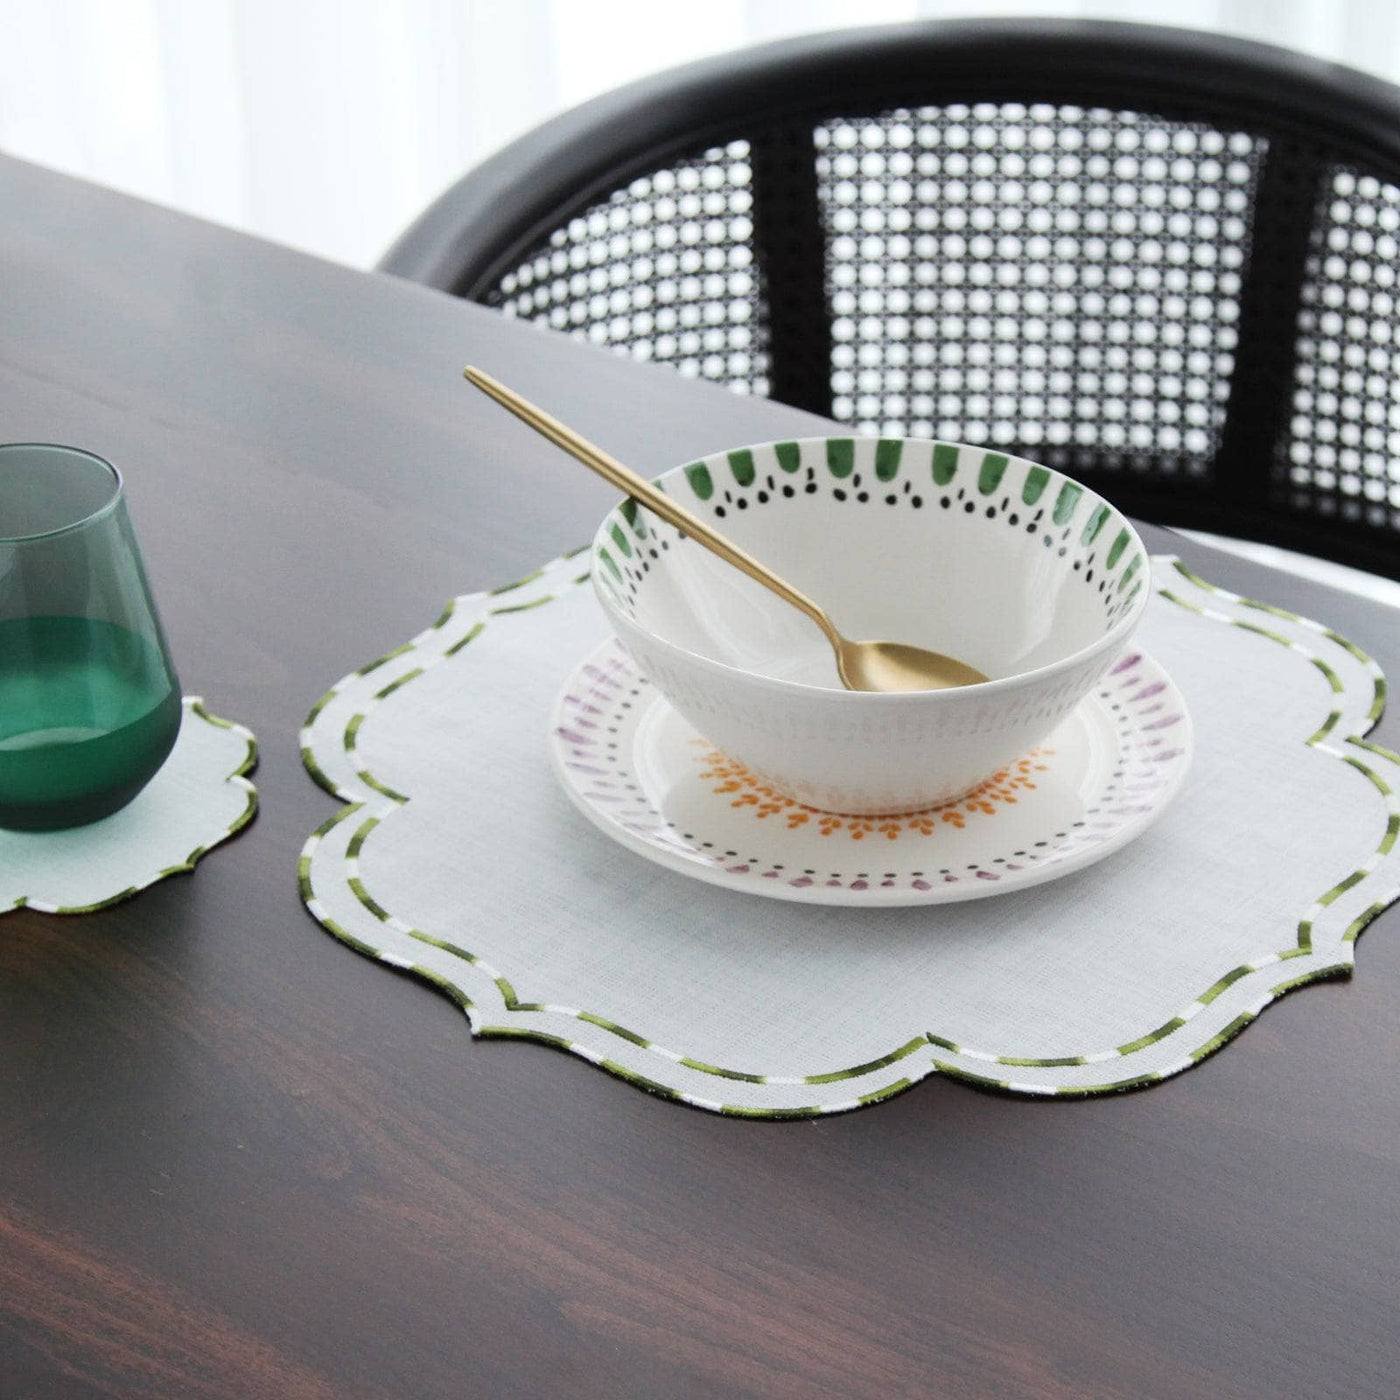 Lawrence Embroidered Placemat and Coaster Set, Green Placemats sazy.com